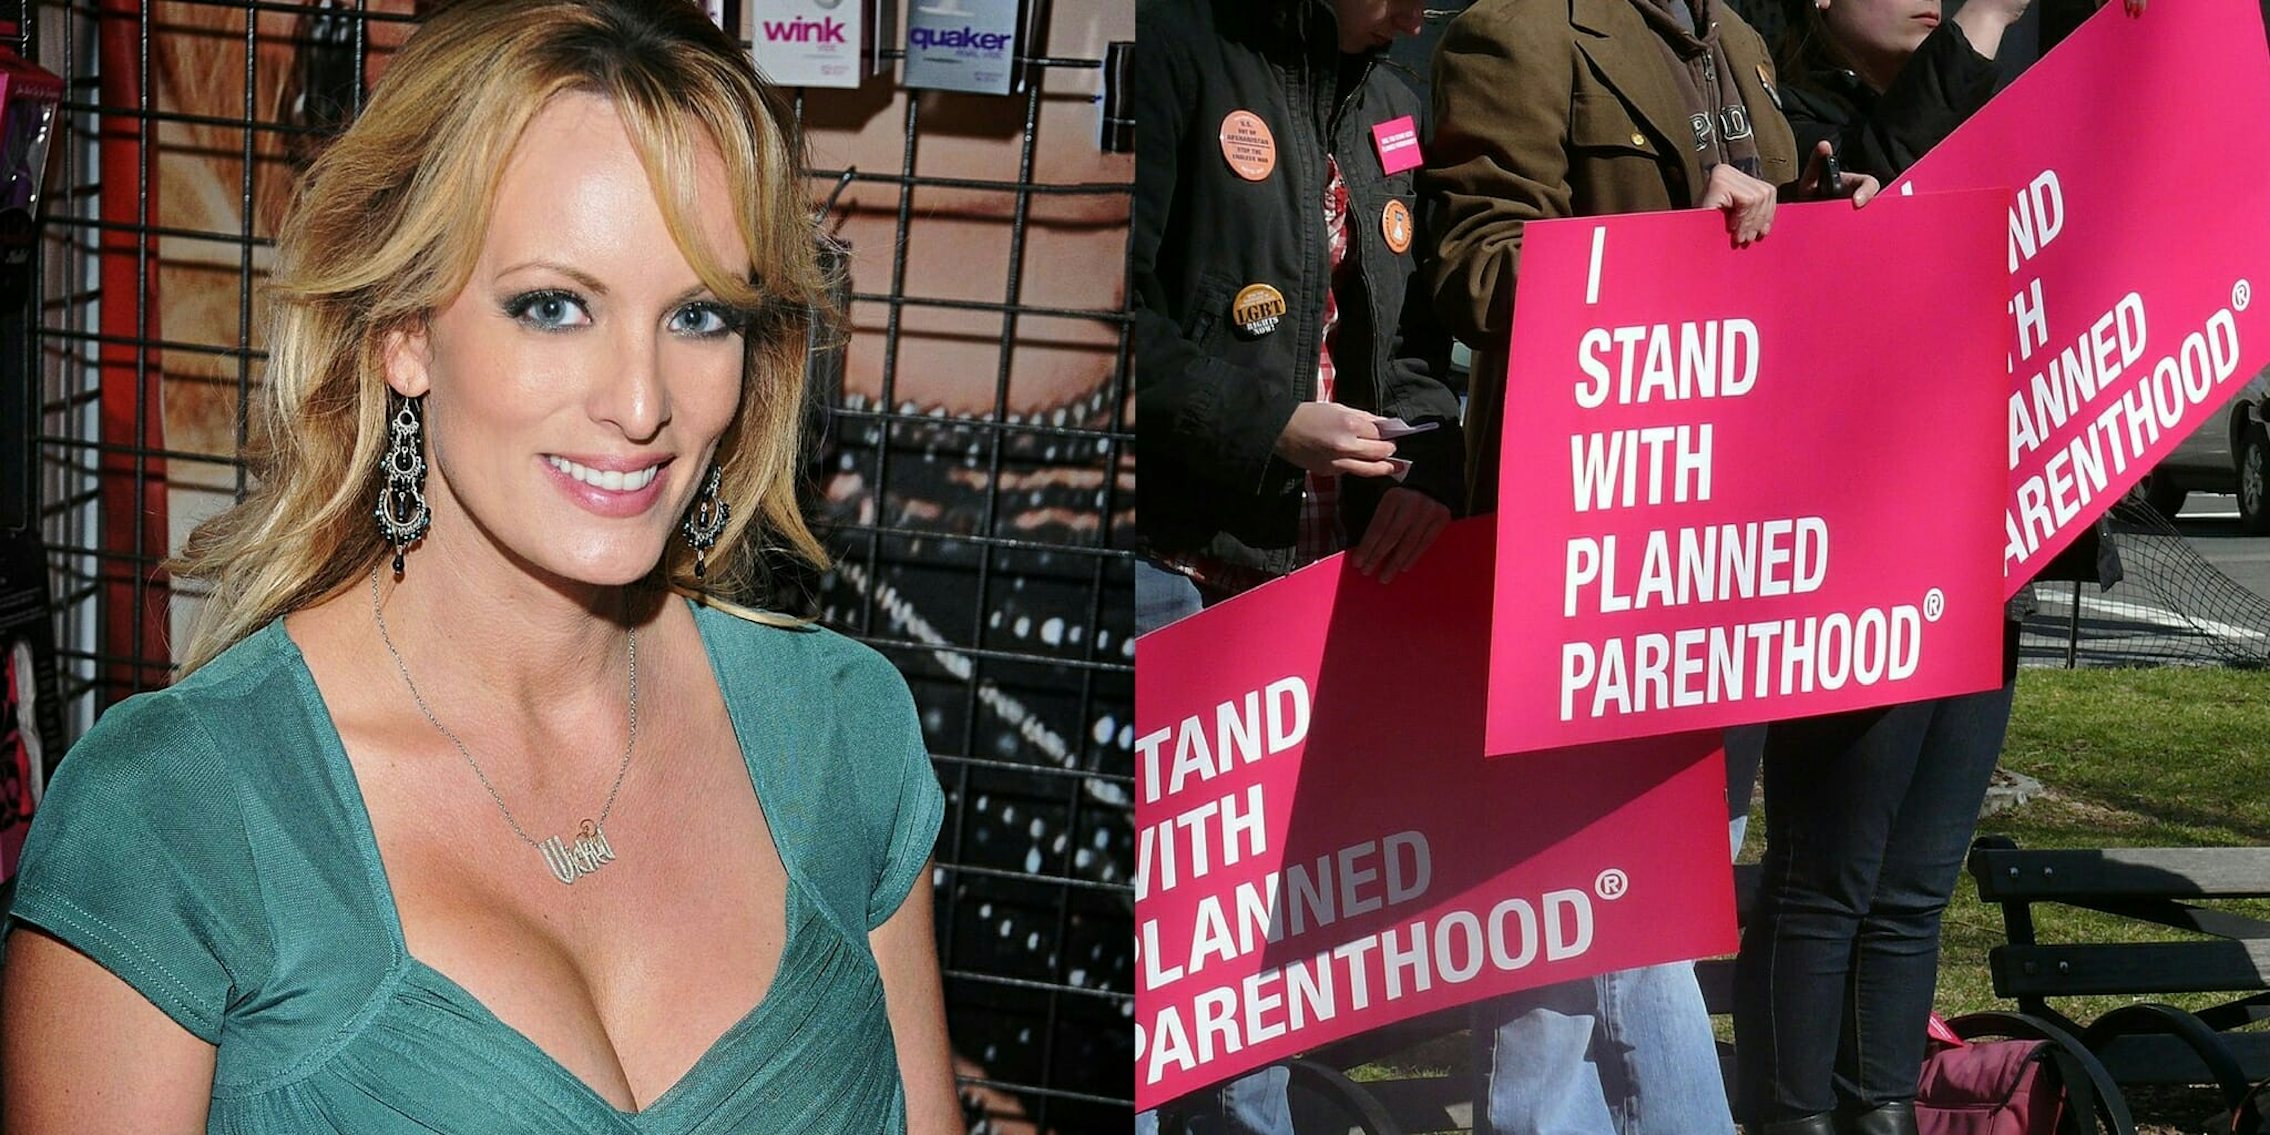 Stormy Daniels next to protesters with signs that say 'I Stand With Planned Parenthood.'